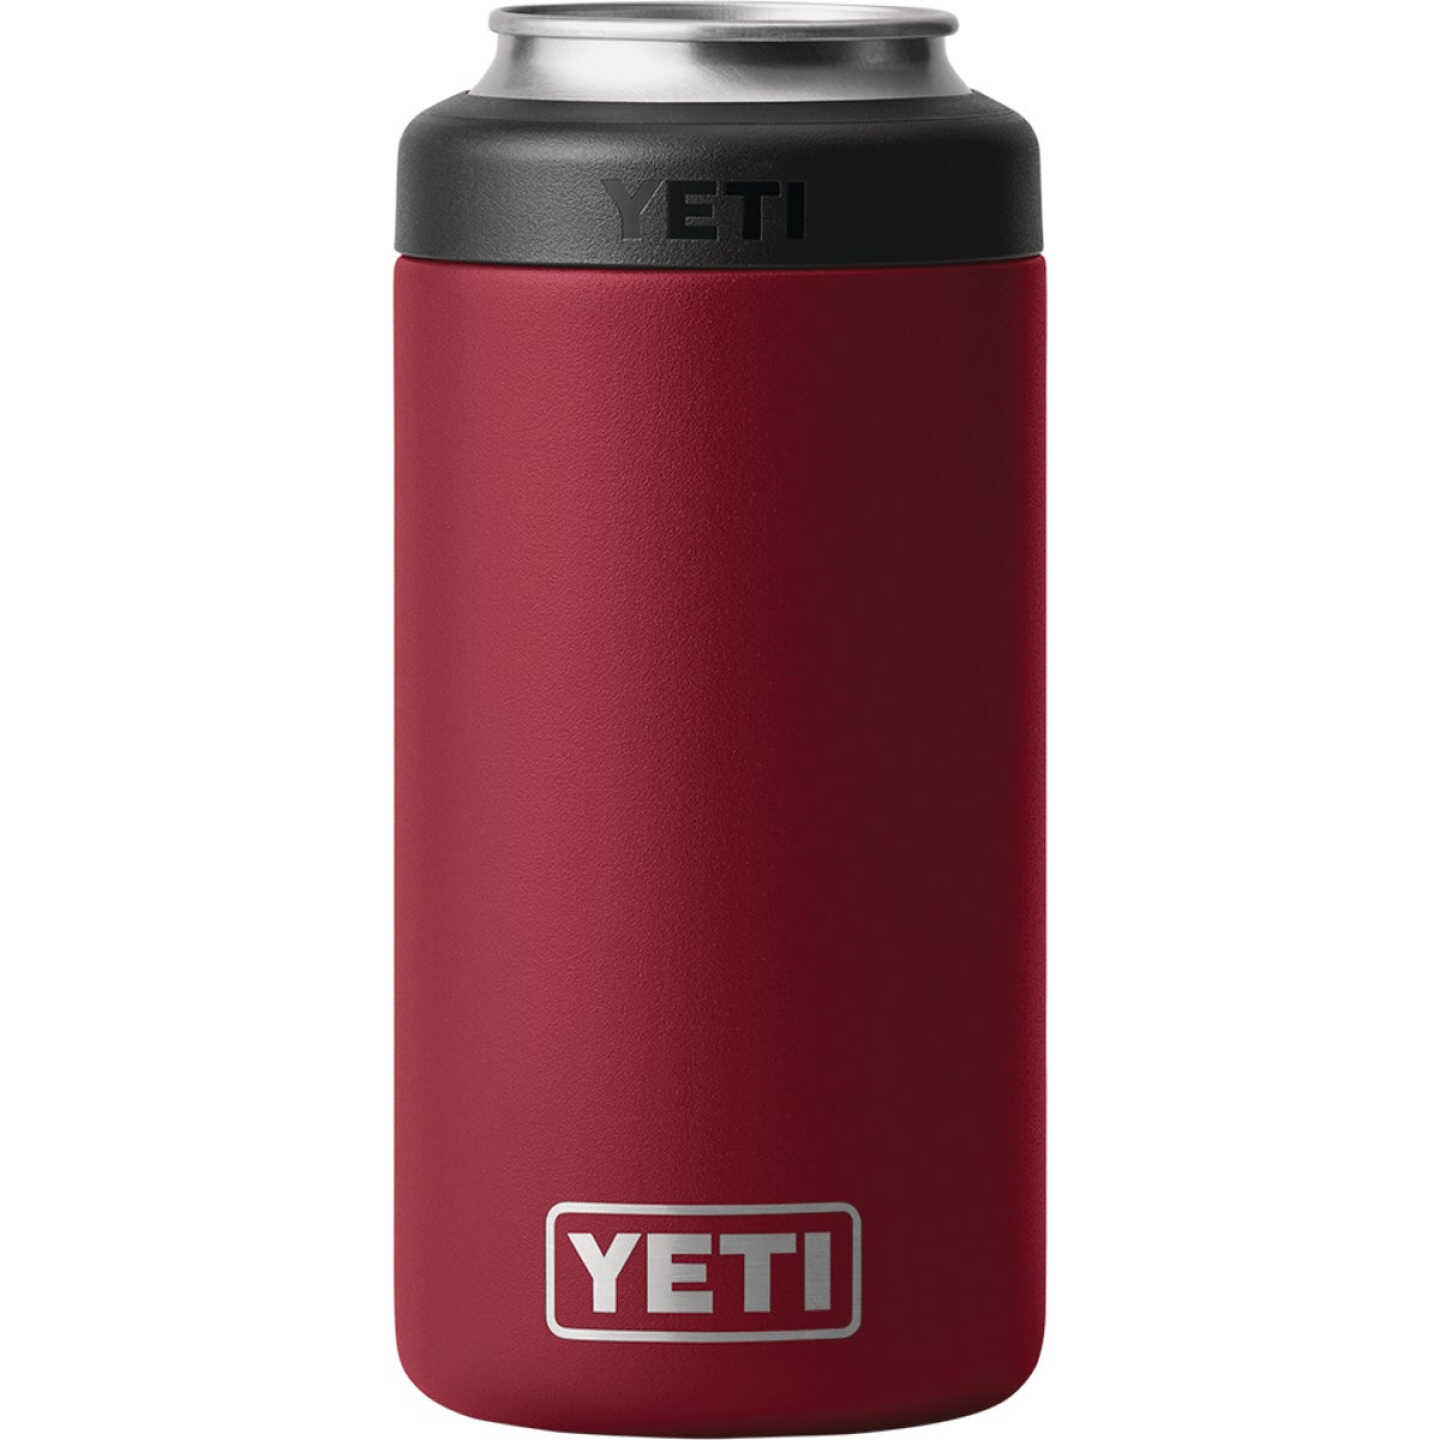 I am in love with the color red. And I am in love with @yeti. So when